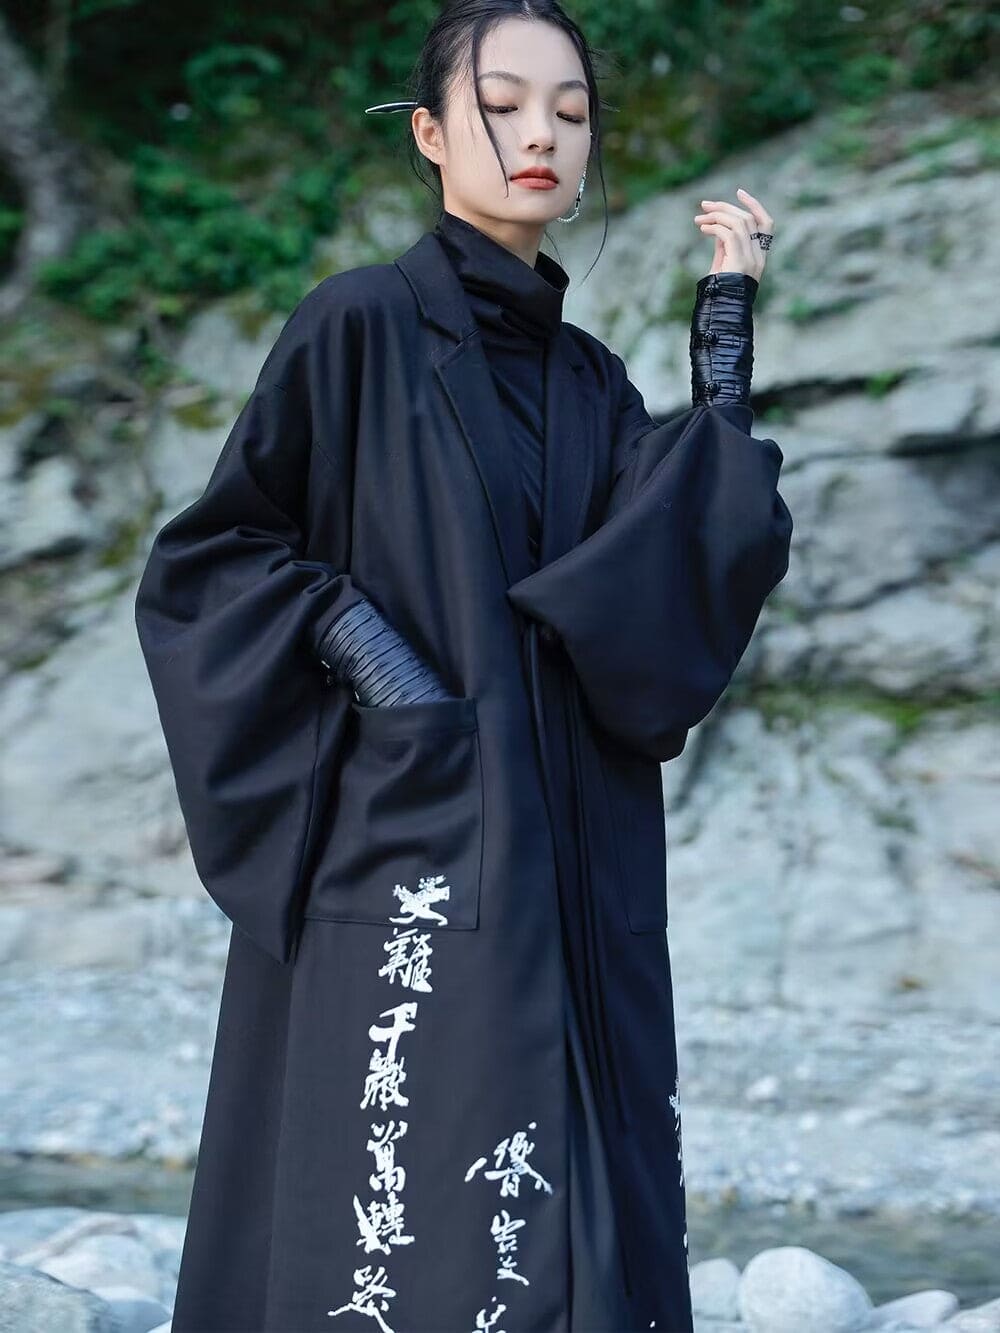 Modern Chinese clothes featuring a black hanfu coat for men, a blend of traditional hanfu menswear and Tang dynasty clothing with a modernized hanfu style, suitable for casual wear or winter hanfu style. The male model is also wearing Chinese cloak and hanfu with pants, depicting a Chinese warrior outfit. The photo indicates where to buy hanfu, including hanfu Amazon and oriental clothing stores near you